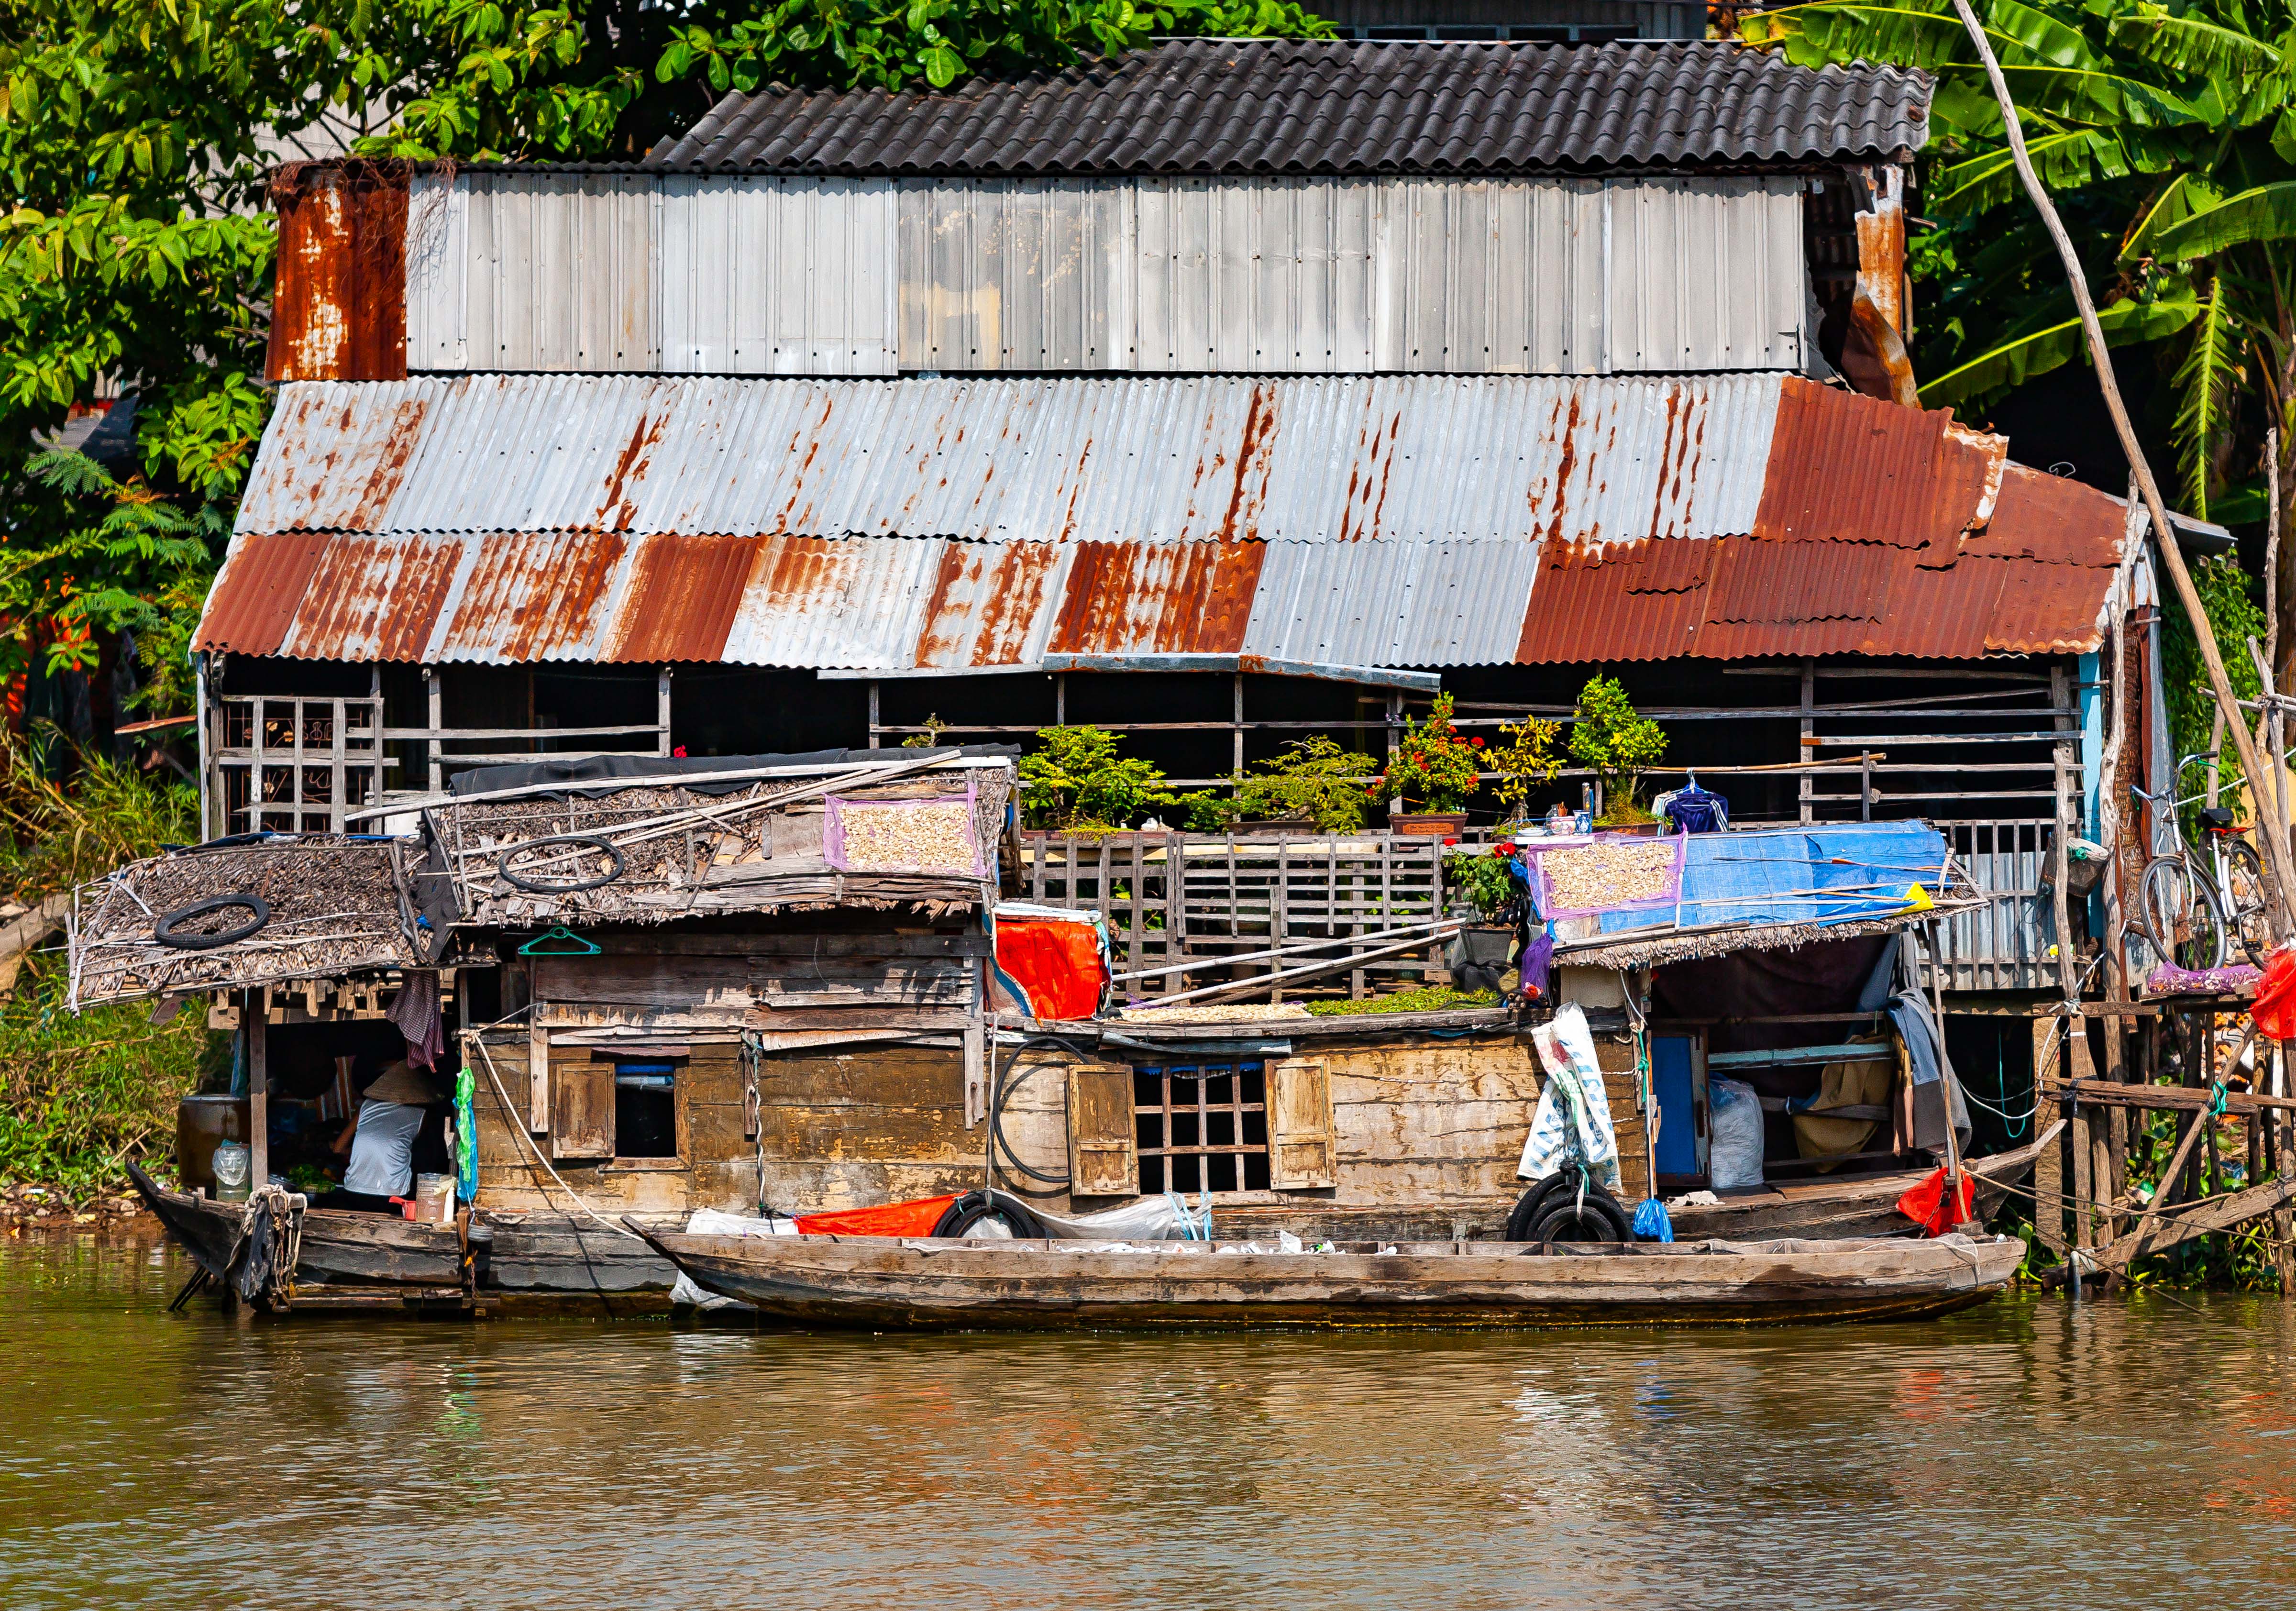 Vietnam, An Giang Prov, House Boat, 2010, IMG 1819